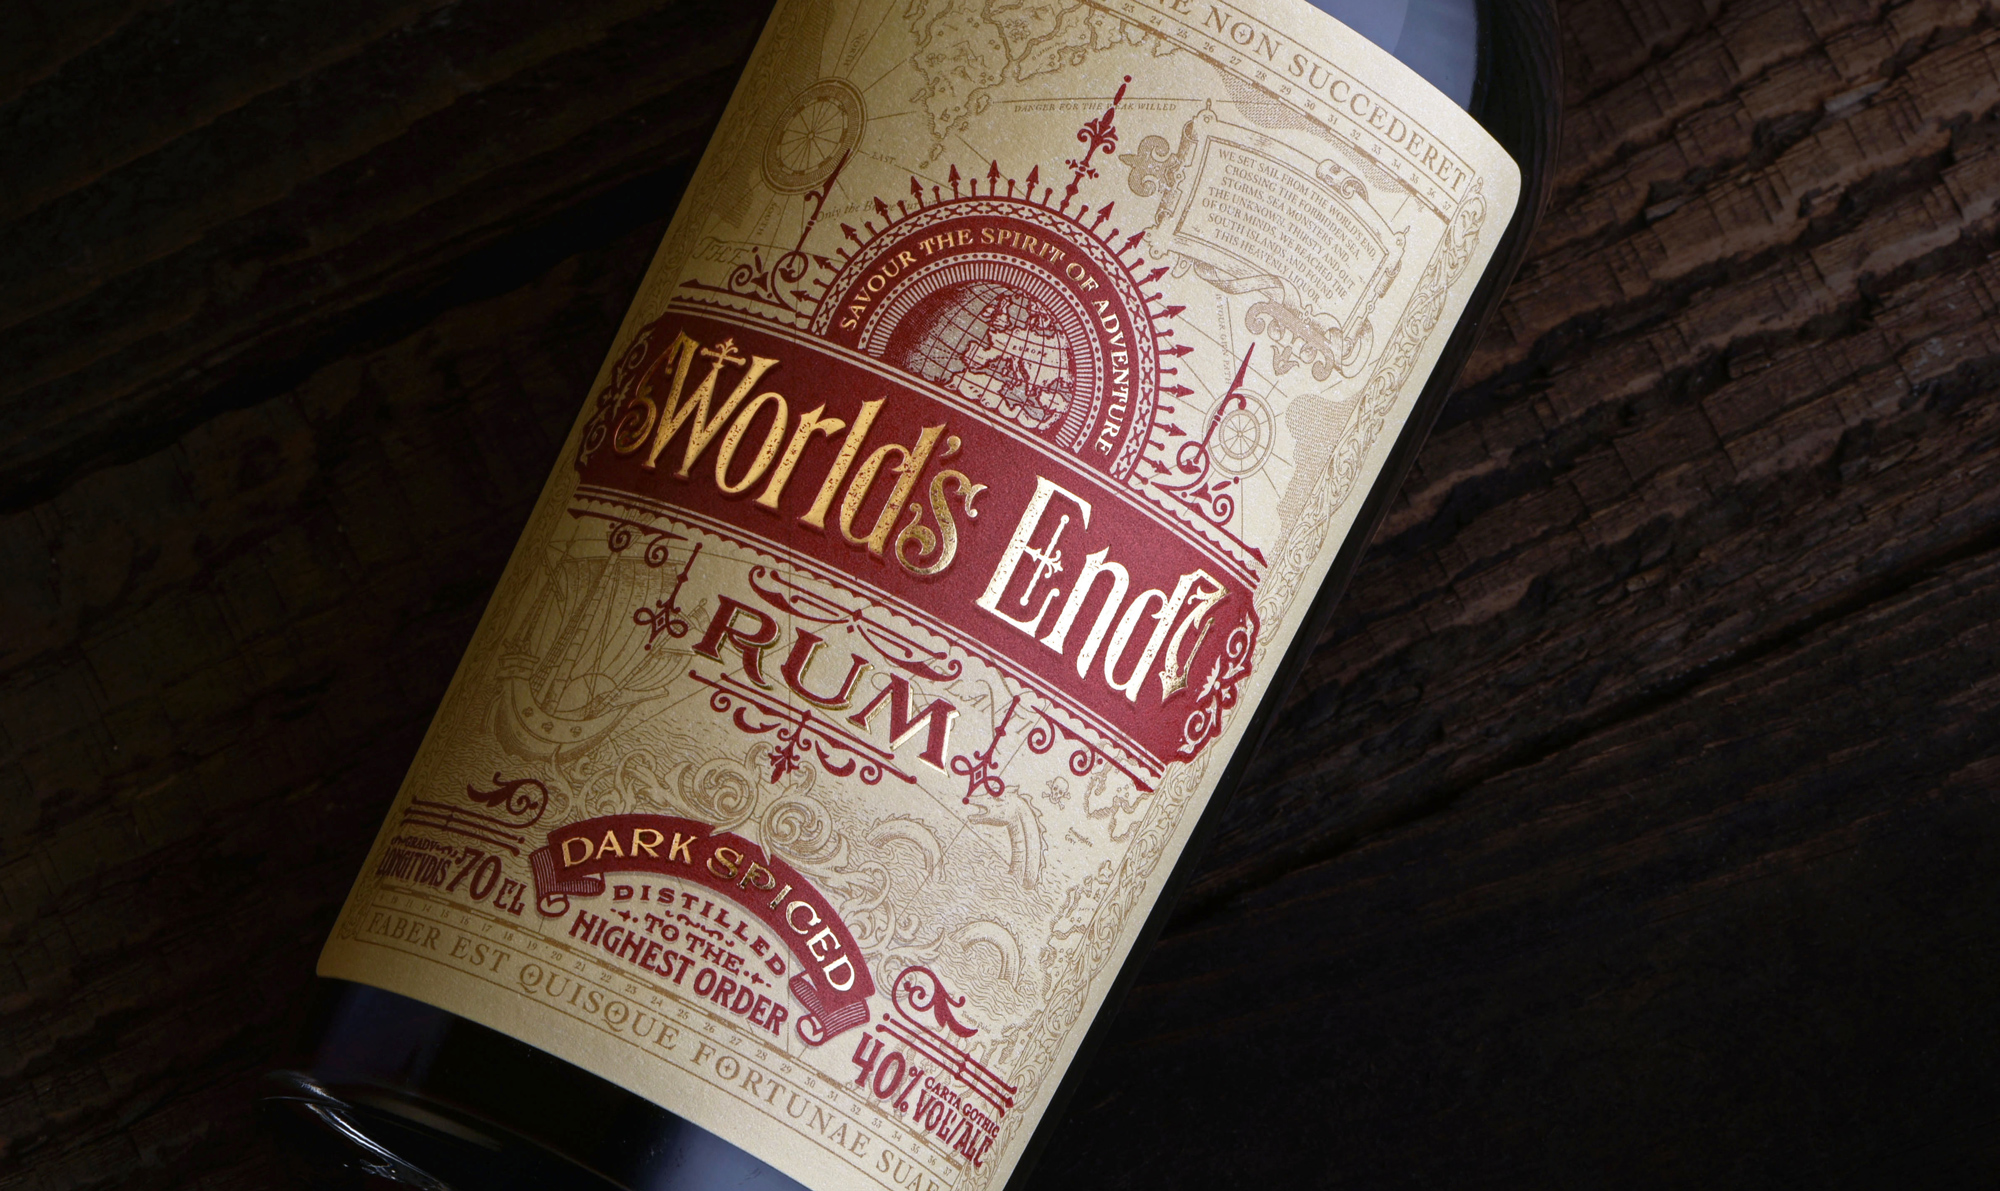 World's End Rum Close up